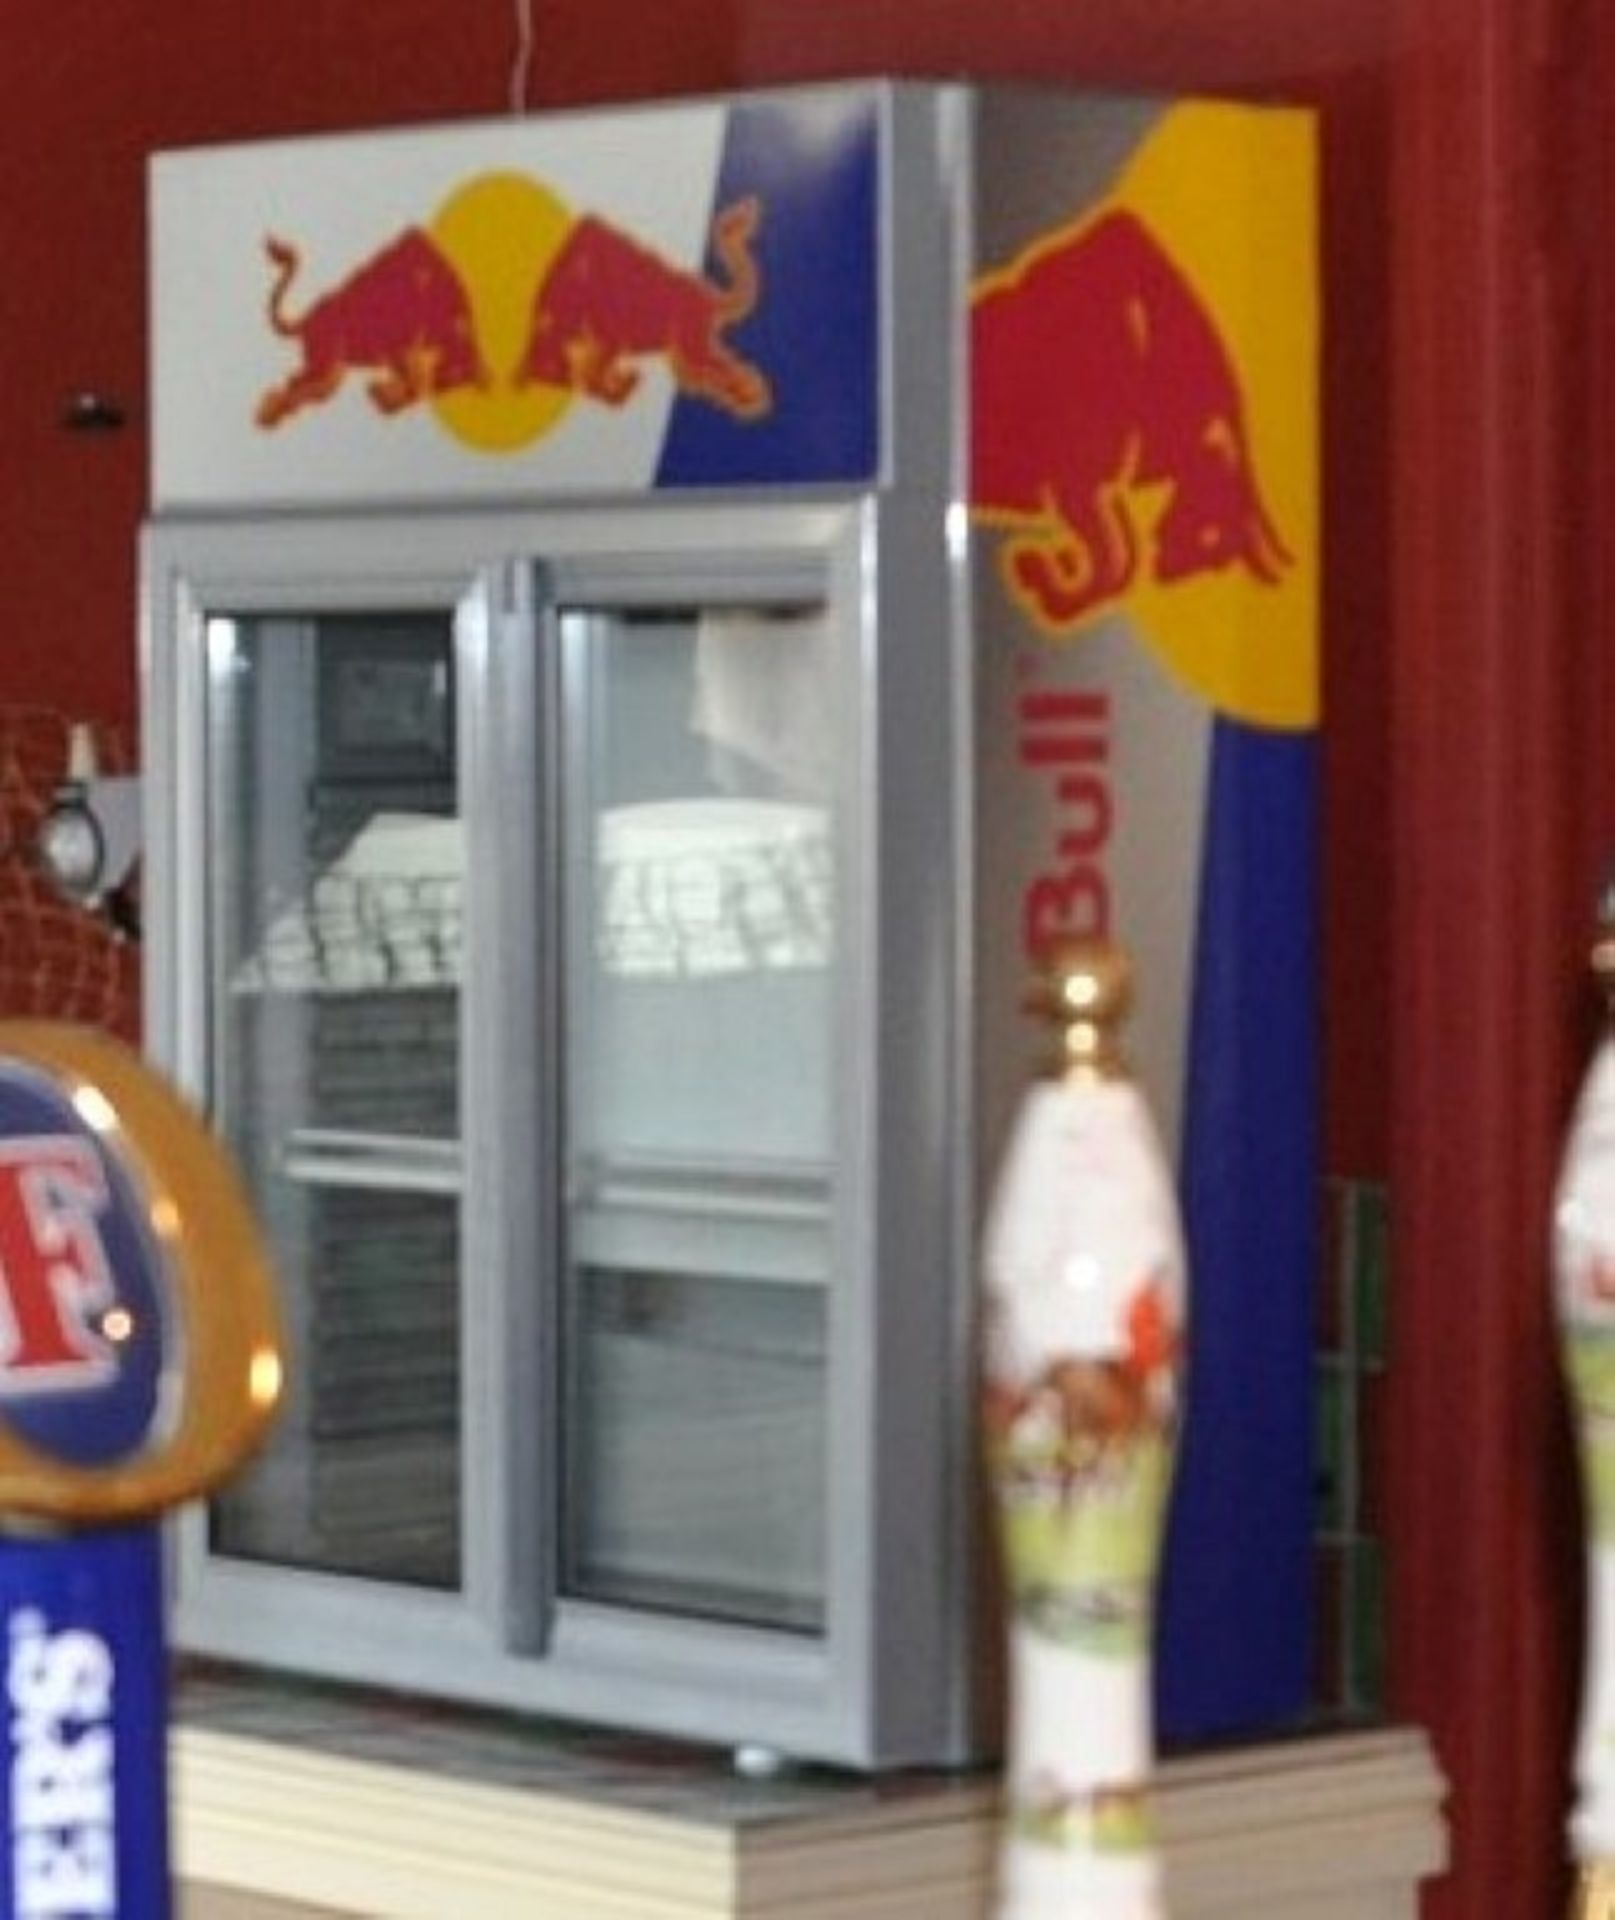 1 x Red Bull Display Fridge - Preowned In Very Good Condition - Dimensions: D36 x W62 x H92cm - Ref: